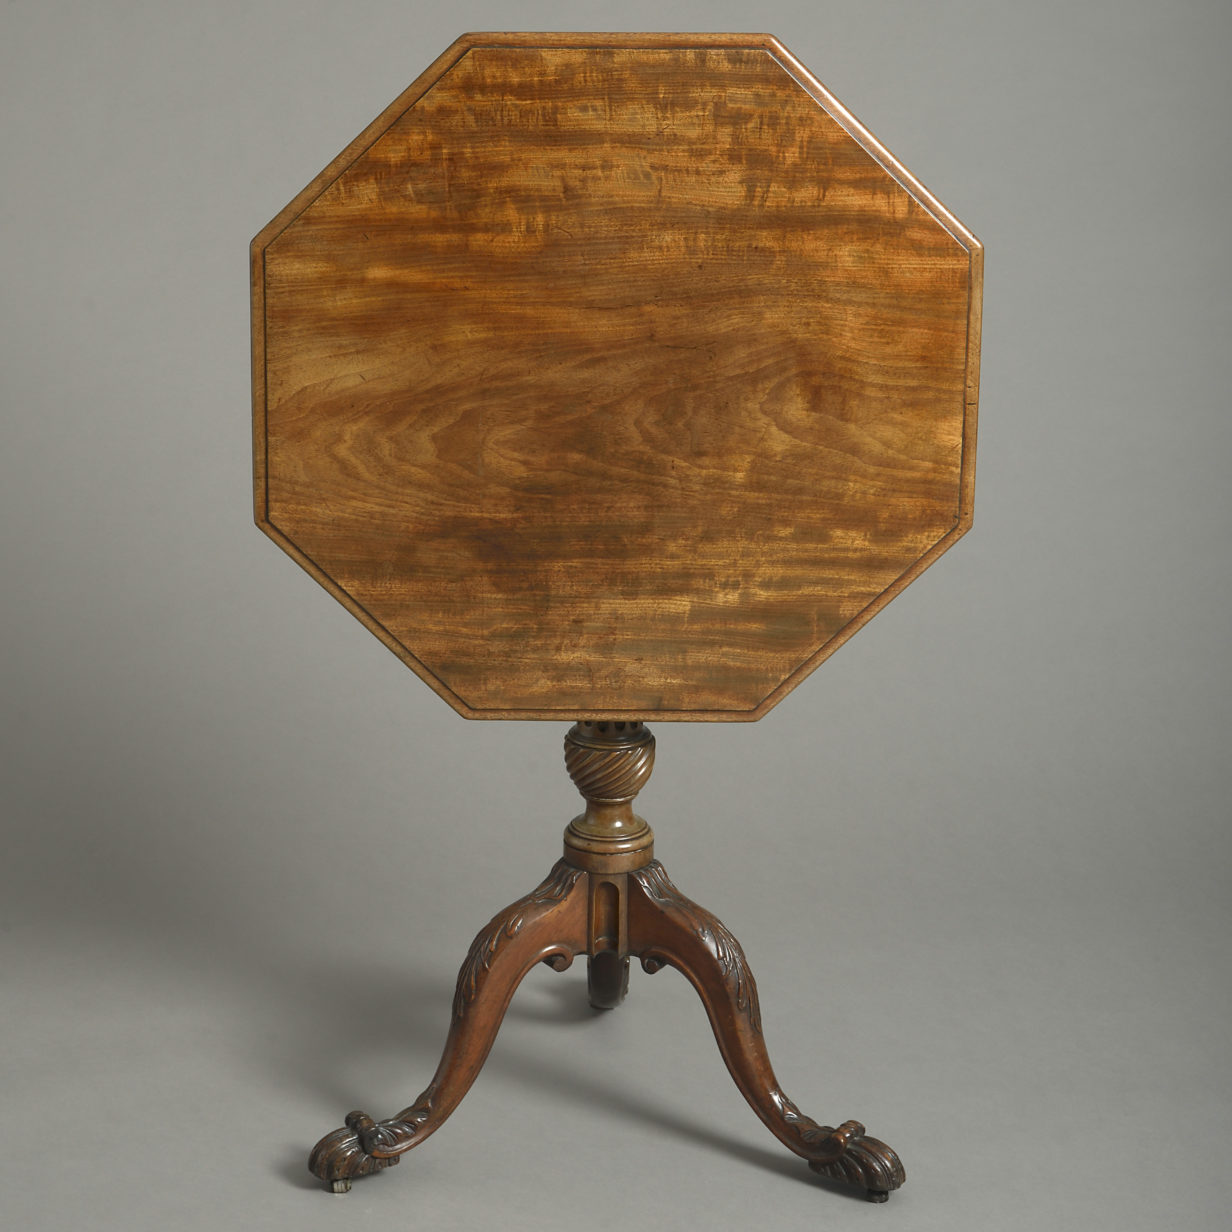 18th century george iii mahogany tripod table - manner of thomas chippendale